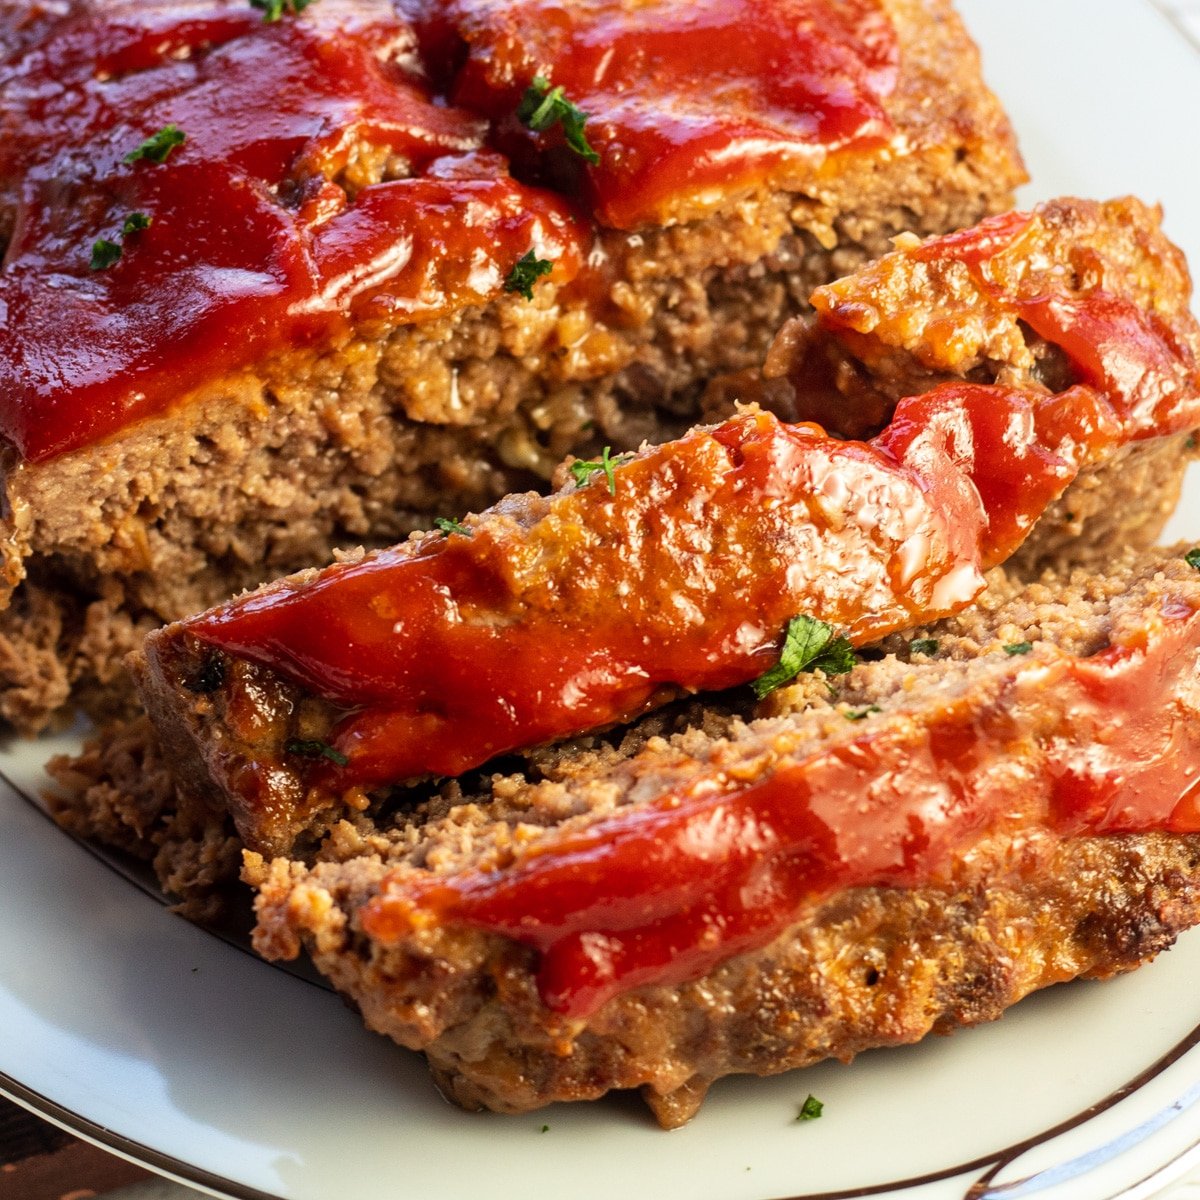 Lipton Onion Soup Meatloaf (Easy Souperior Meatloaf!) - Bake It With Love